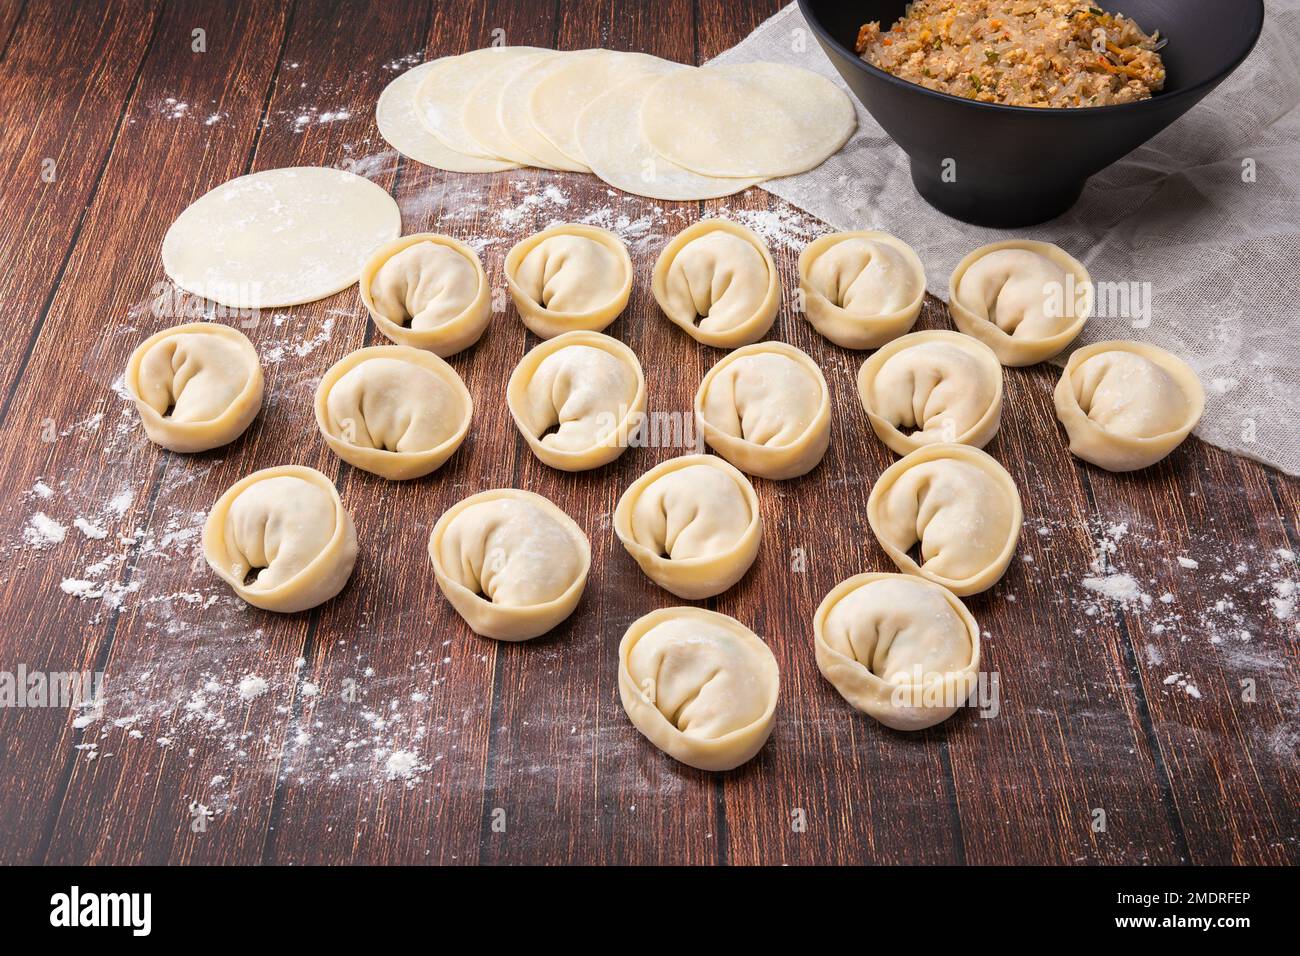 Homemade kimchi dumplings made with wheat flour and shaped into round shapes. Wood deck background, closeup viewed from above. Stock Photo